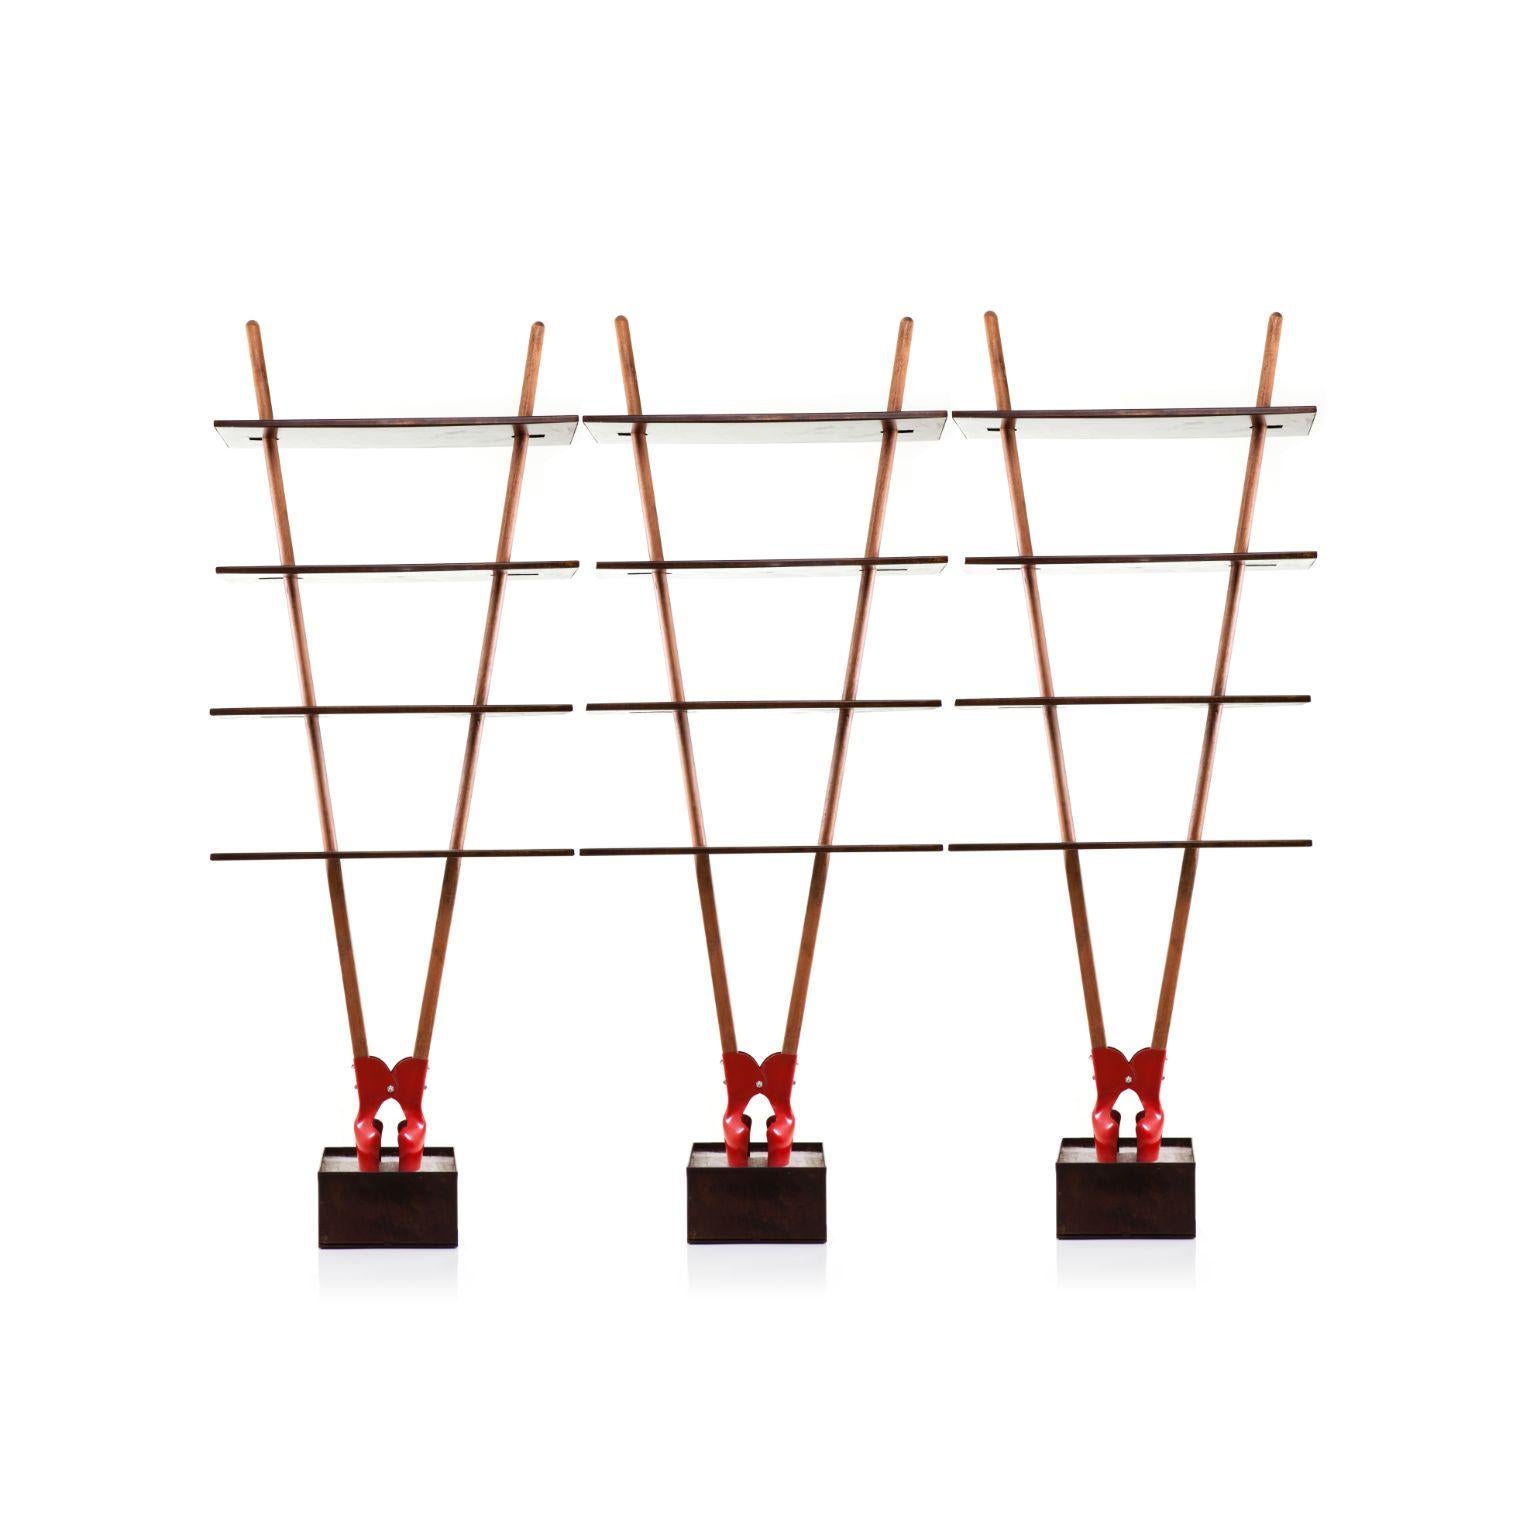 A set of 3 Da Pa Vermelha - Shelves by Cultivado Em Casa
Dimensions: 80 x 30 x 205 cm
Materials: Digger, carbon steel and concrete

Shelf built from an articulated shovel, a hand tool widely used in agriculture and civil construction. The tool